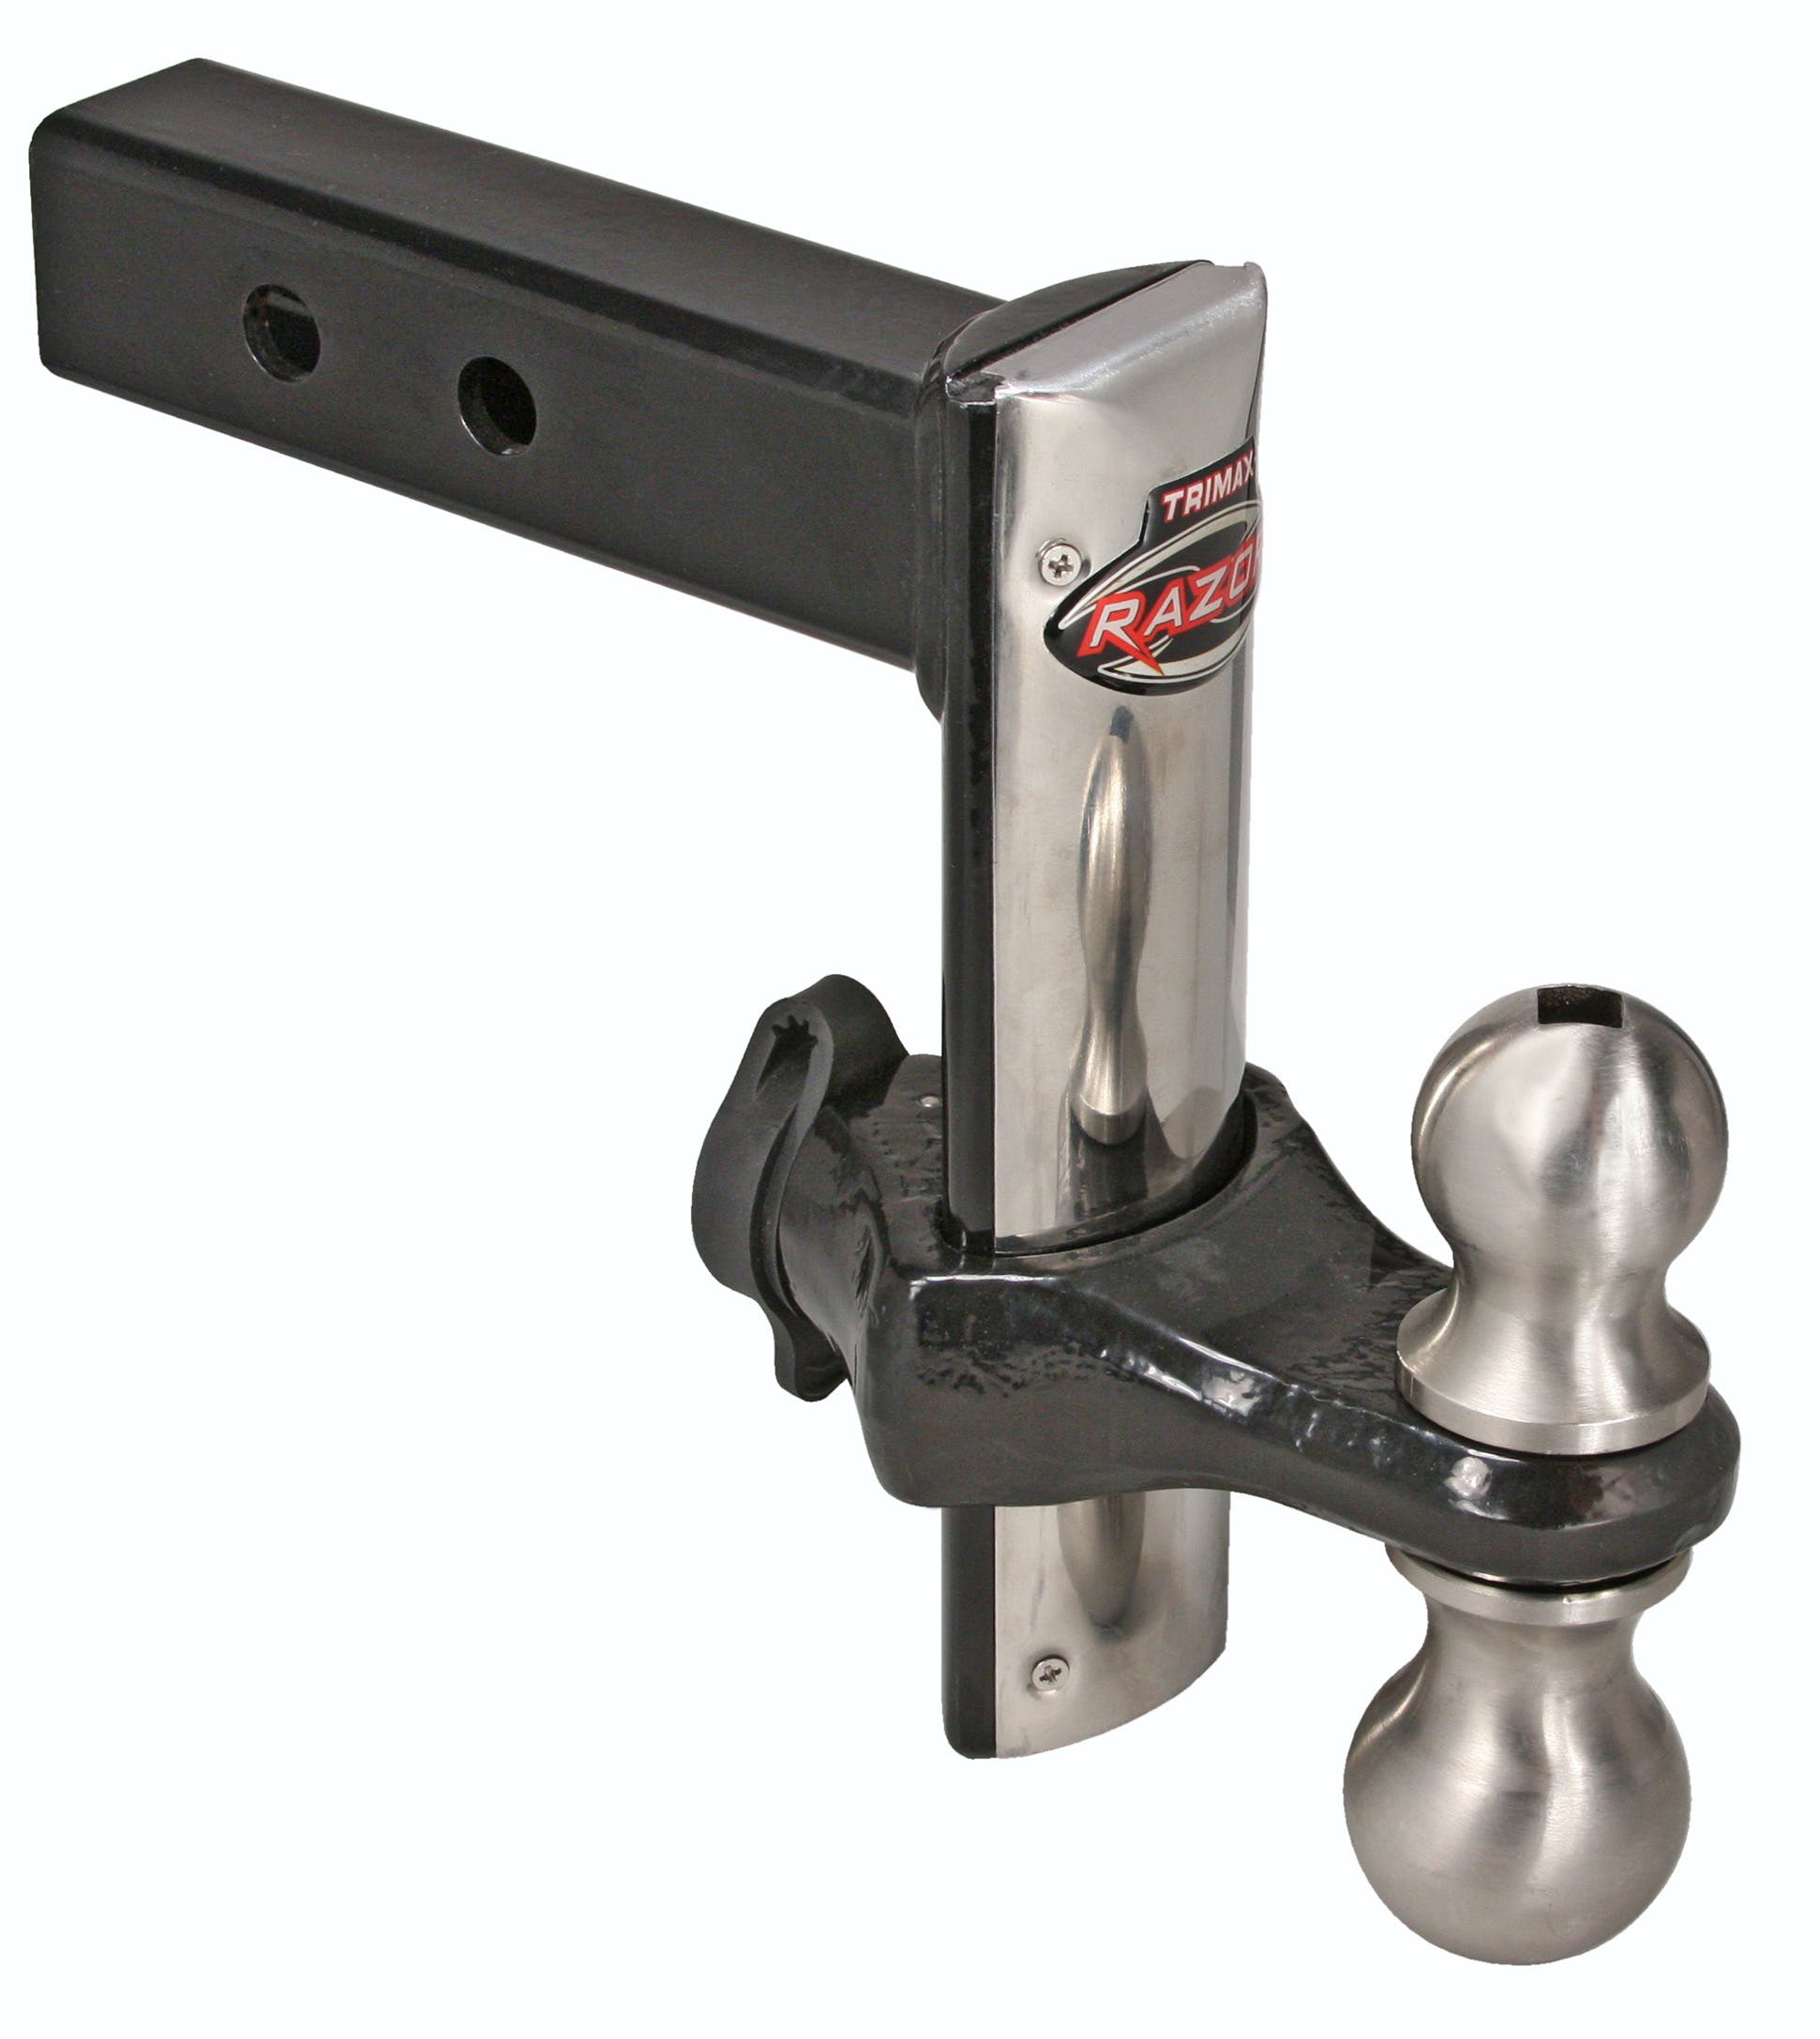 TRIMAX TRZ8SFP 8 inch Forged with Stainless Steel Face Plate Adjustable Drop Hitch